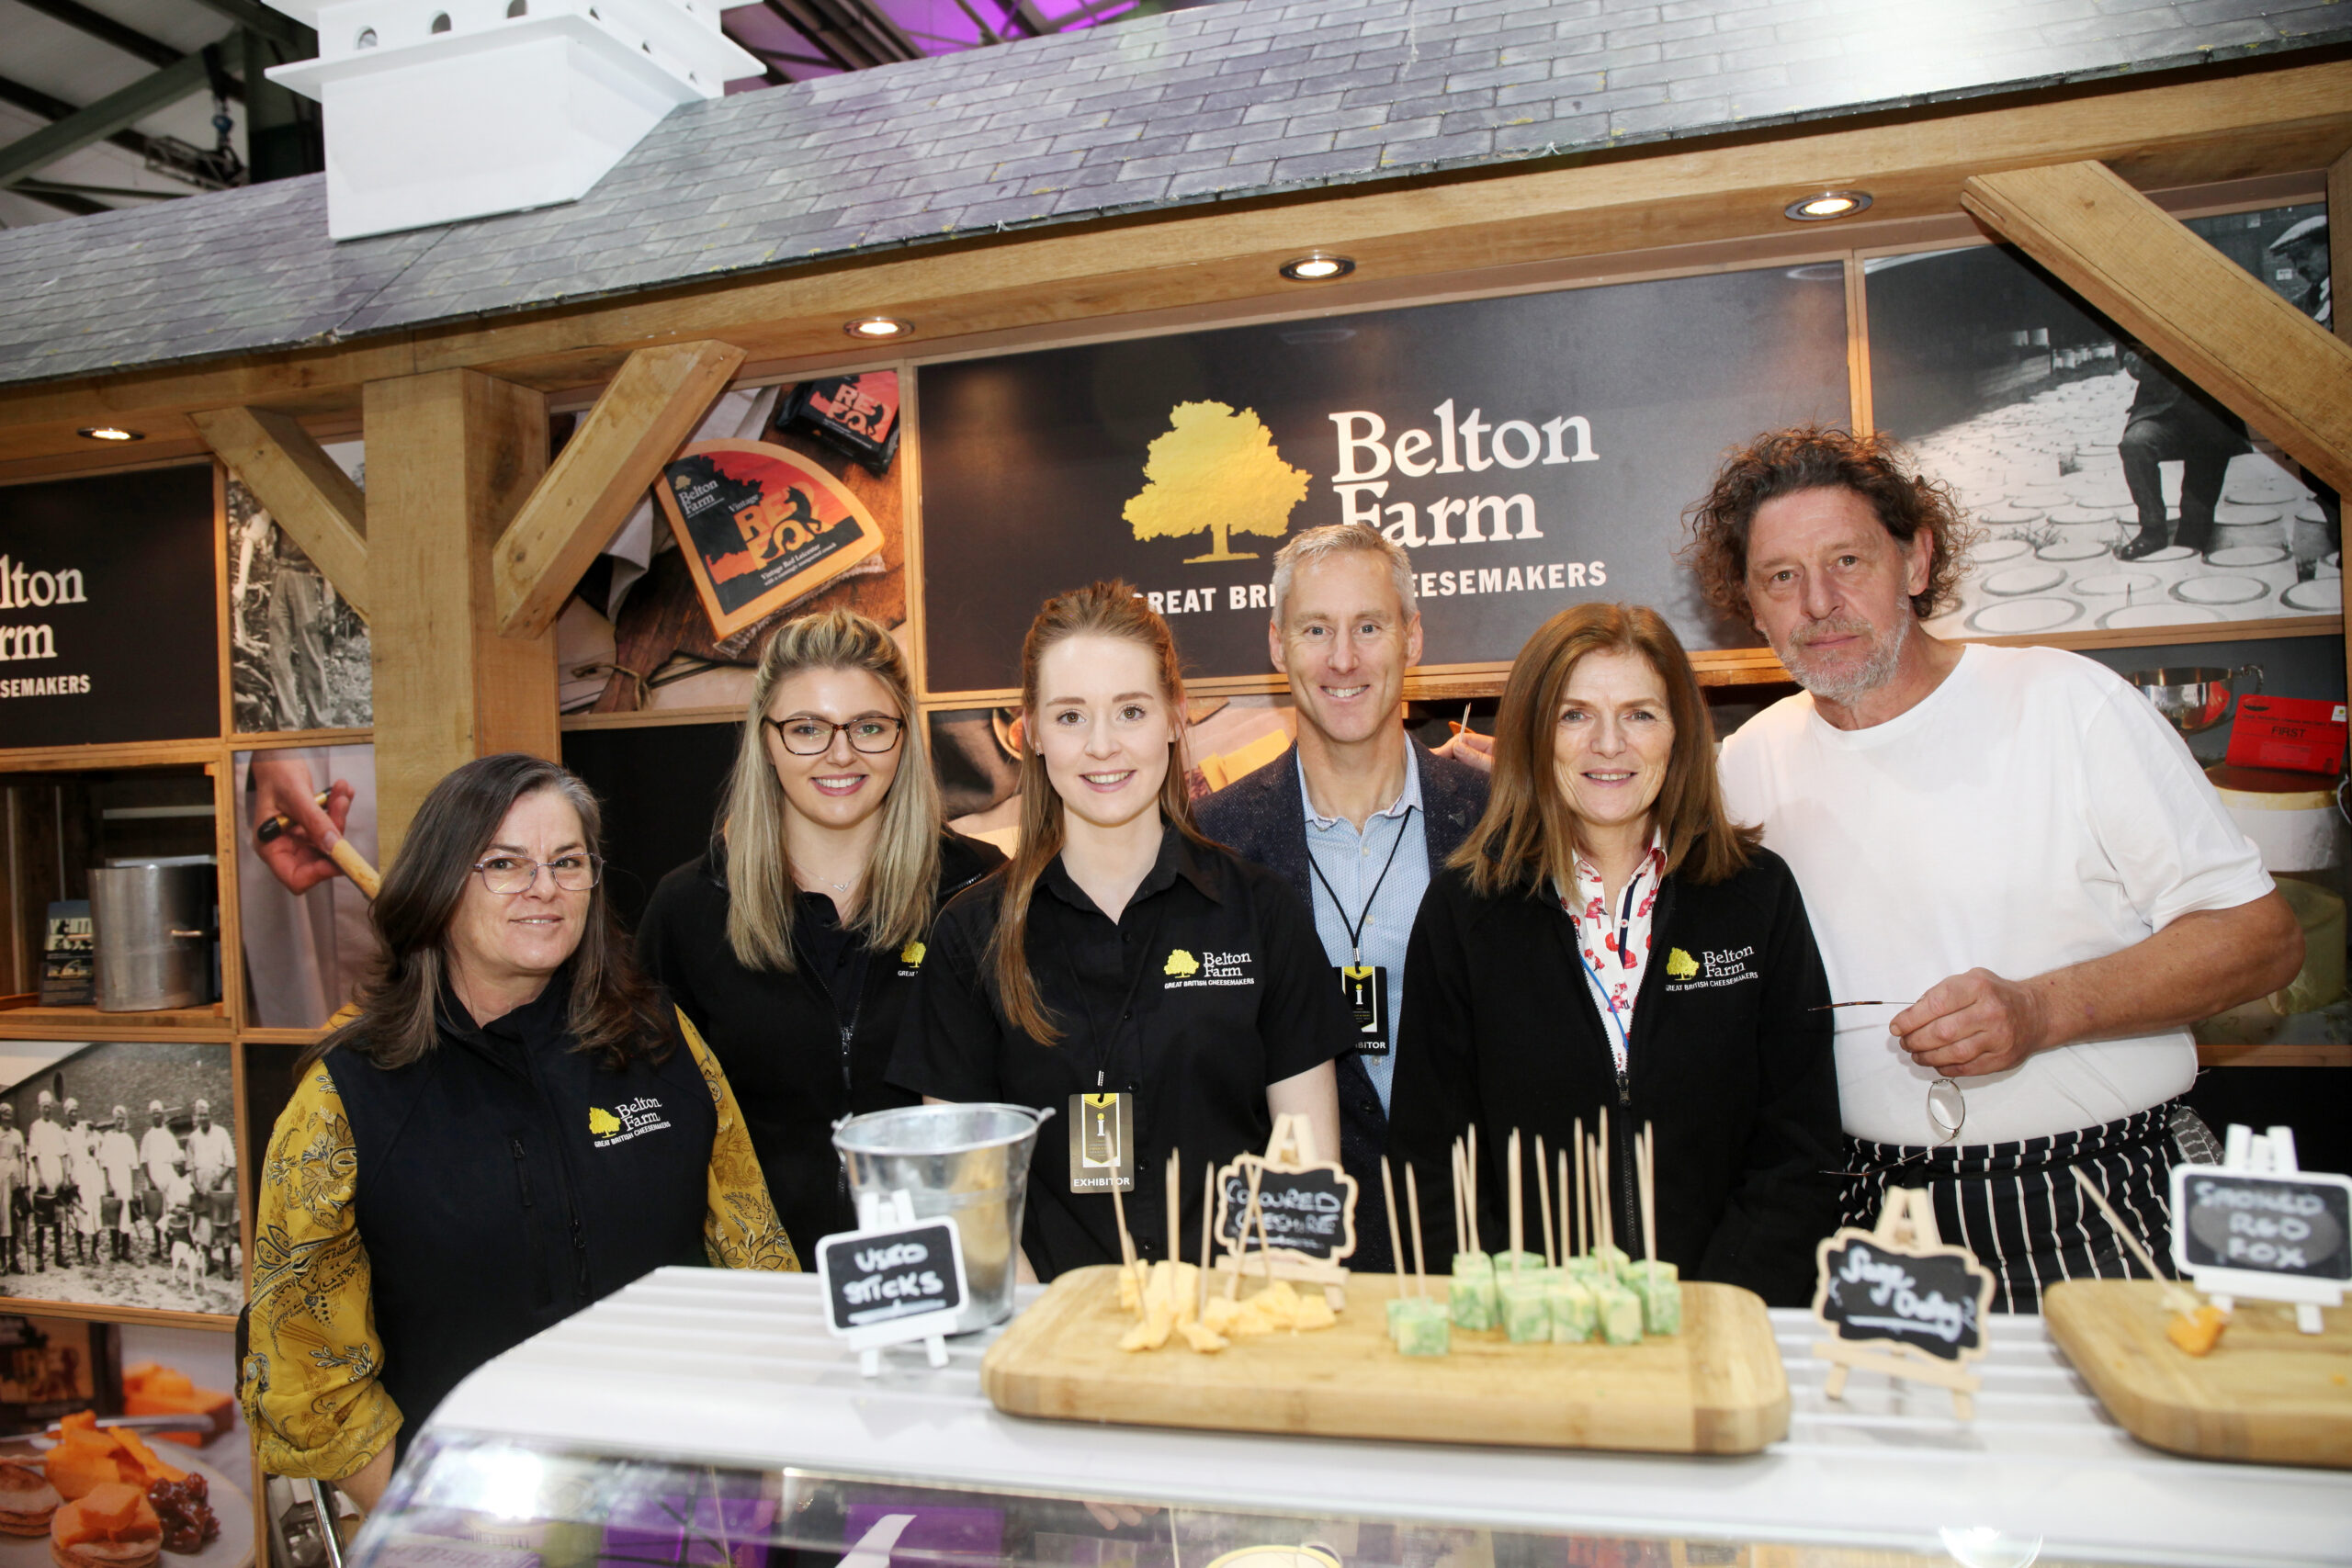 Success for Belton at the International Cheese Awards! Belton Farm